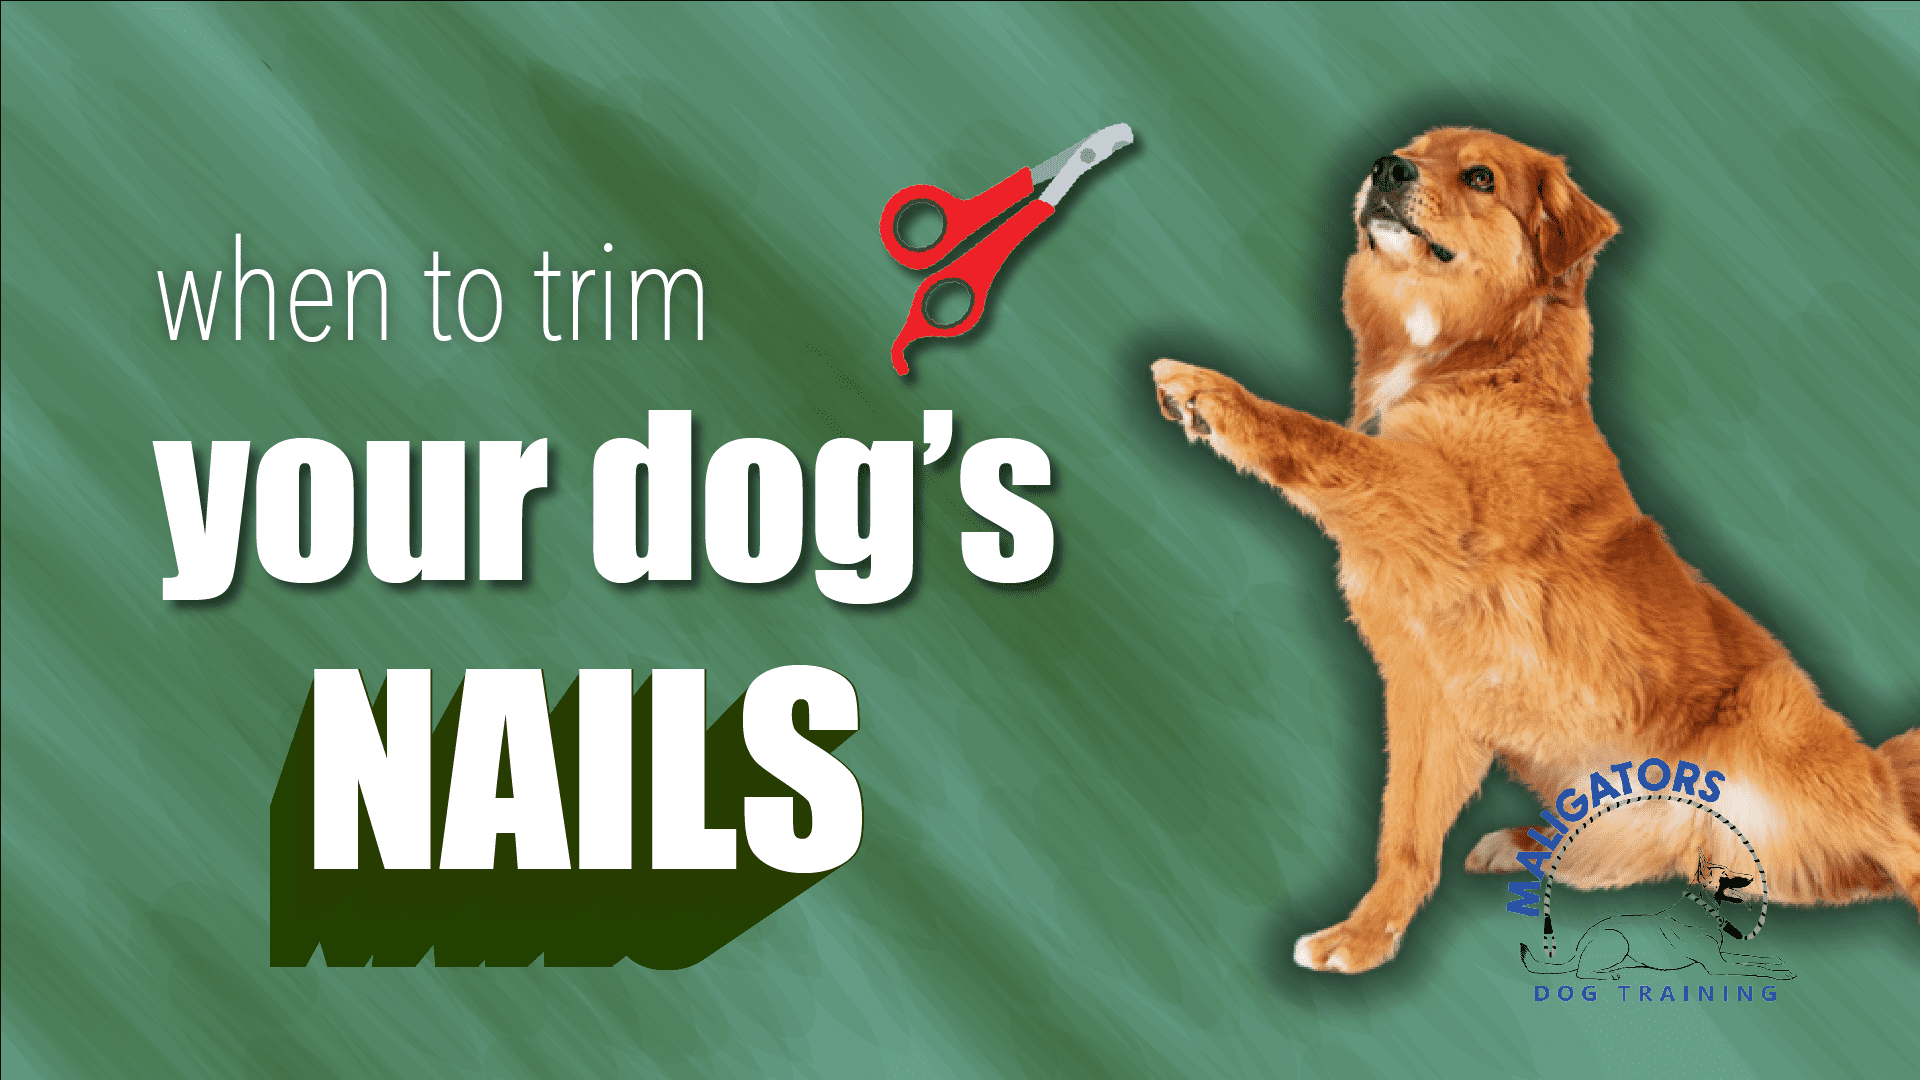 When Should You Trim Your Dog’s Nails?